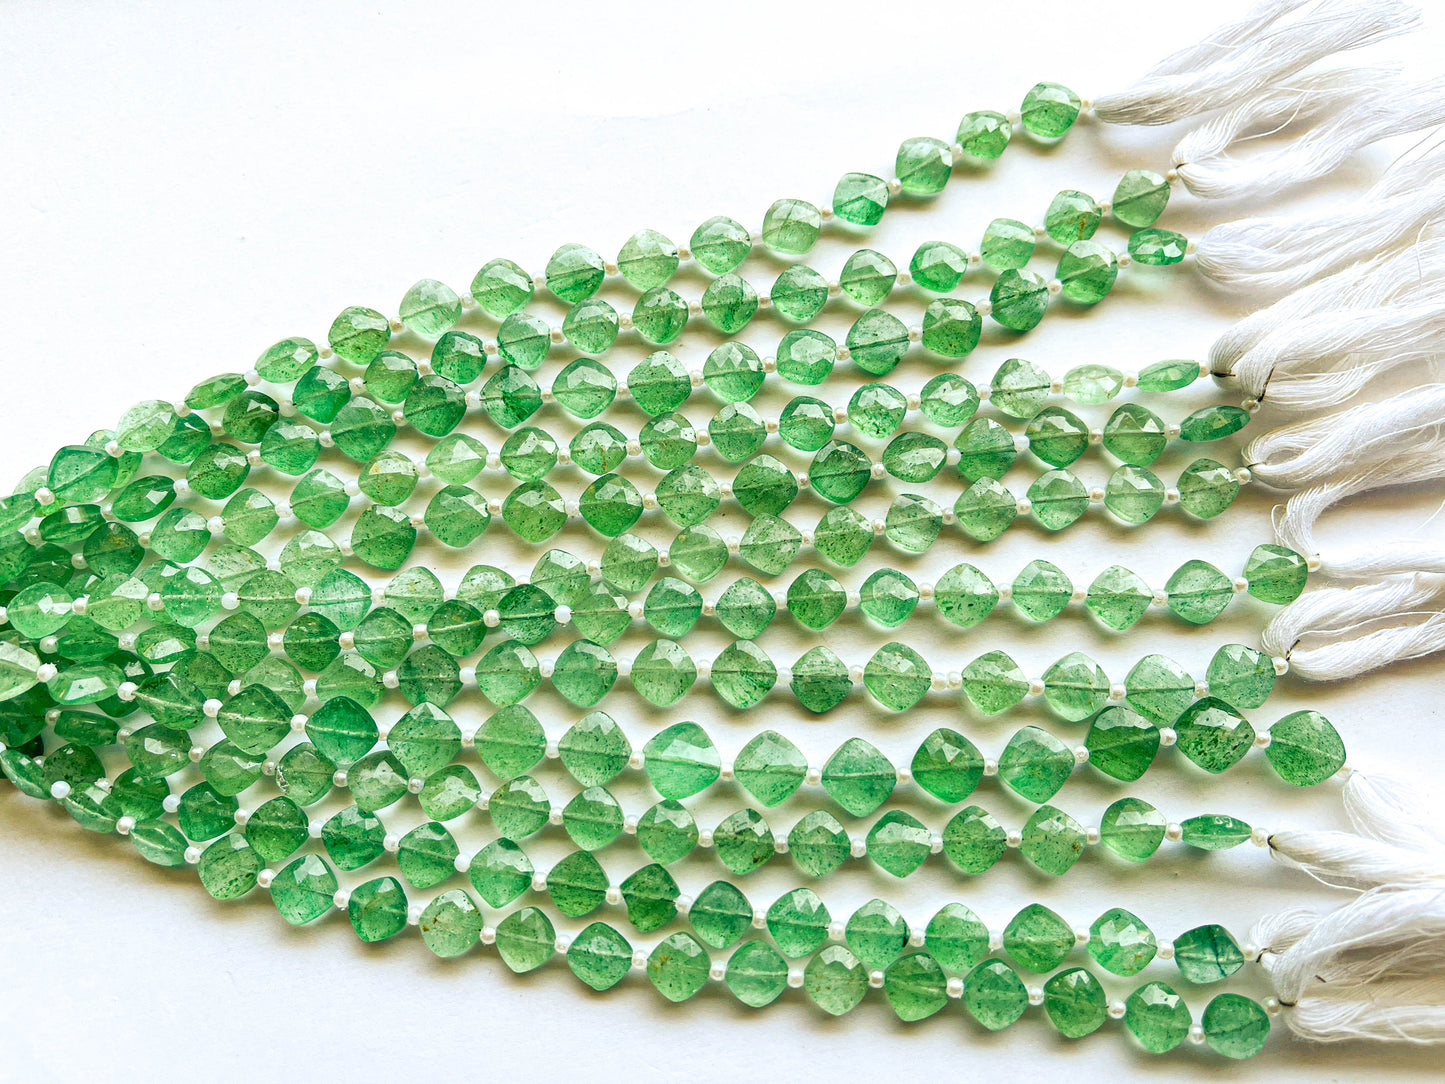 Green Aventurine Cushion Shape Faceted Briolette Beads Beadsforyourjewelry